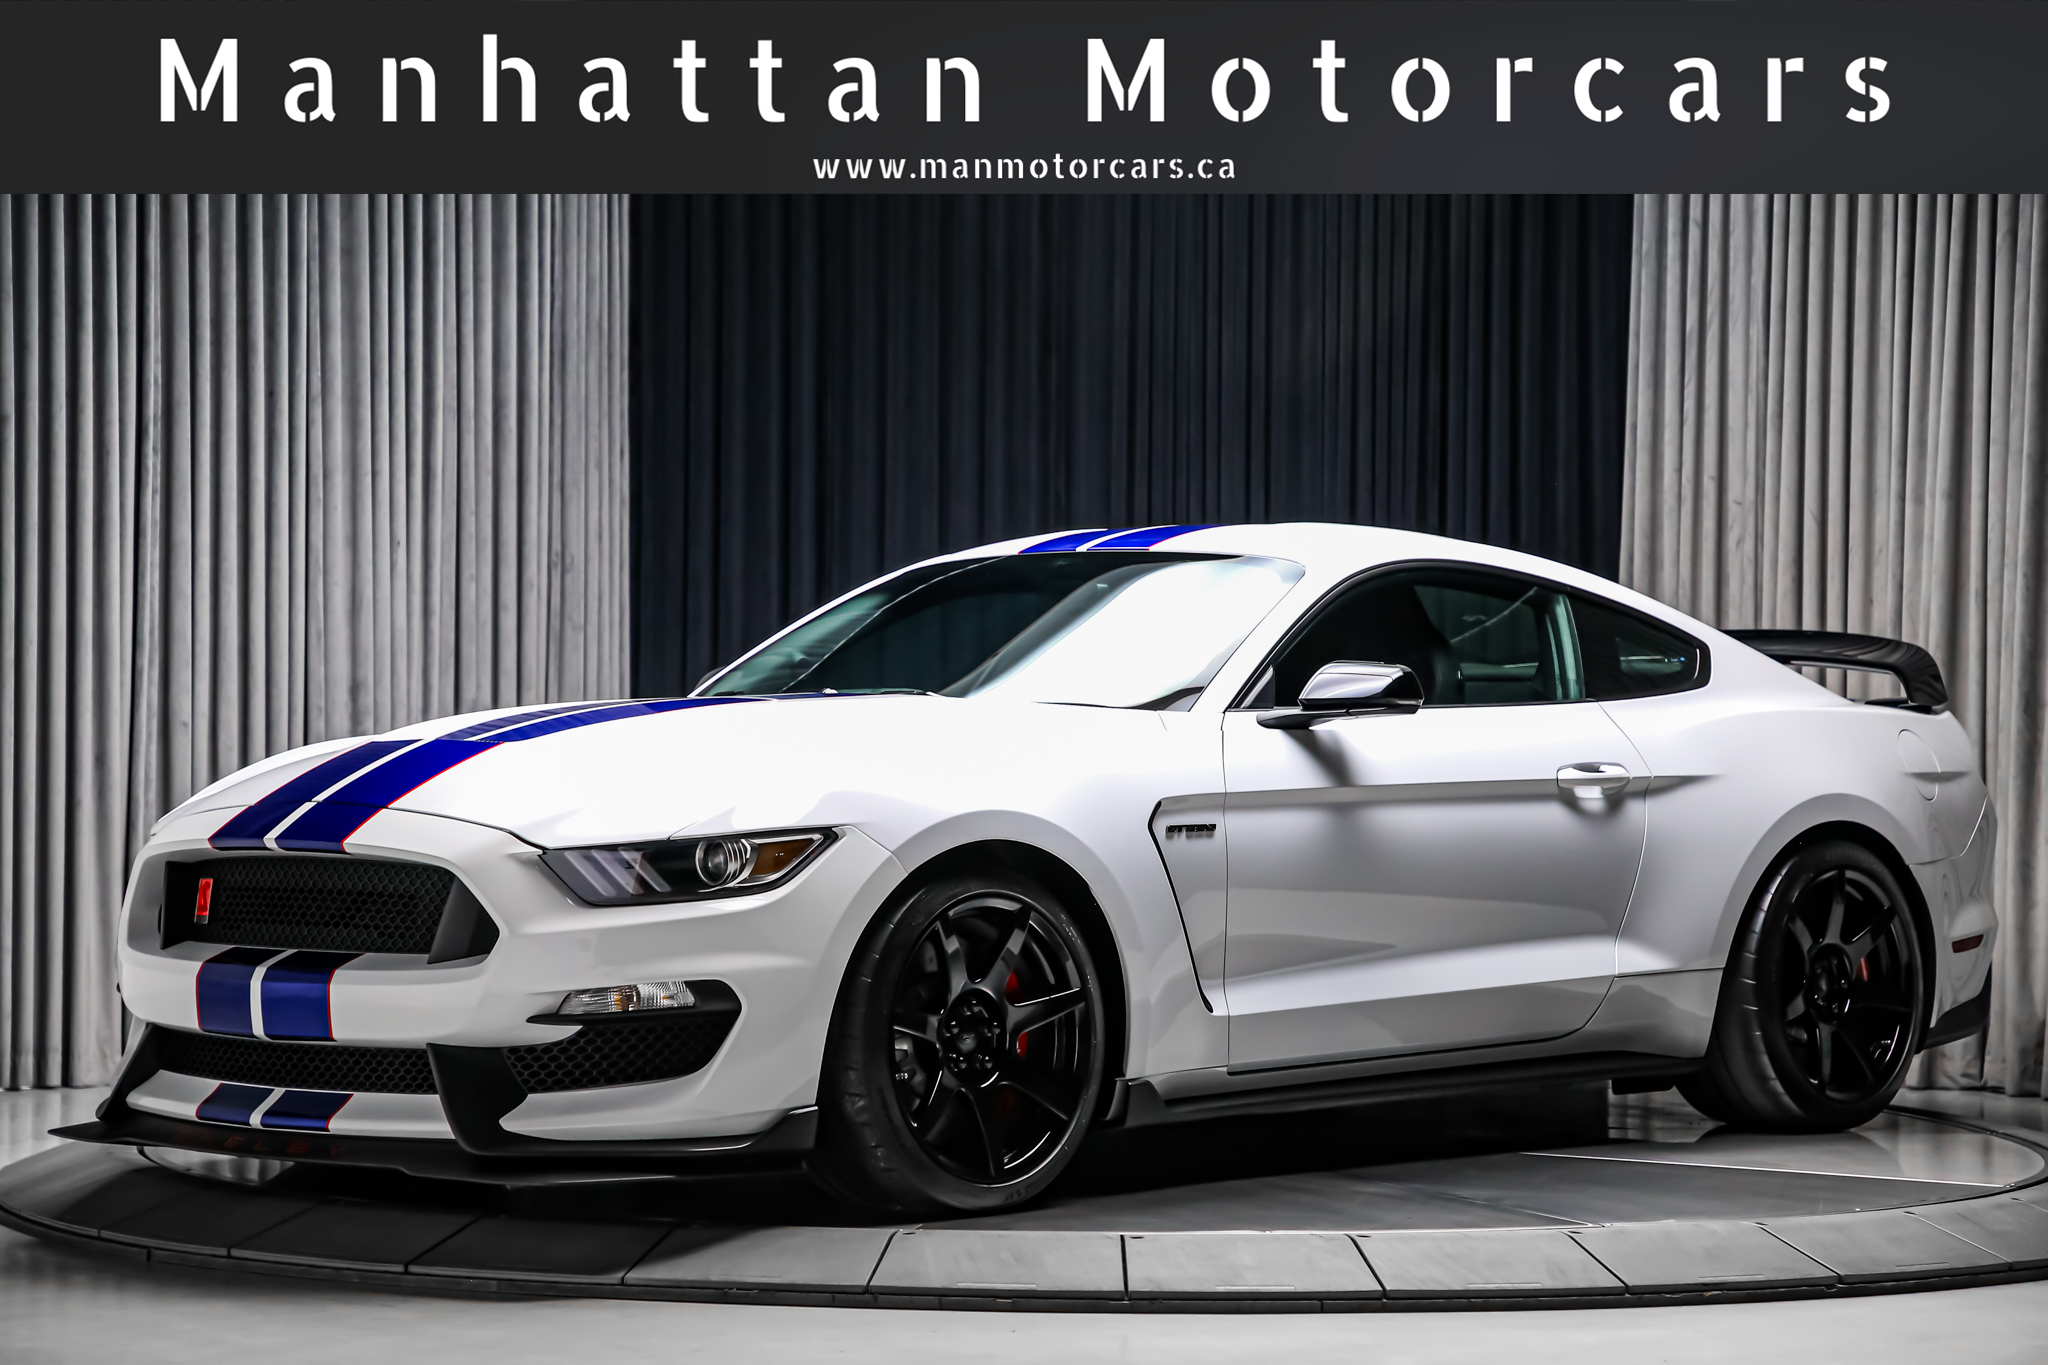 2016 Ford Mustang SHELBY GT350R 5.2L V8 526HP|CARBONRIMS|NOACCIDENTS